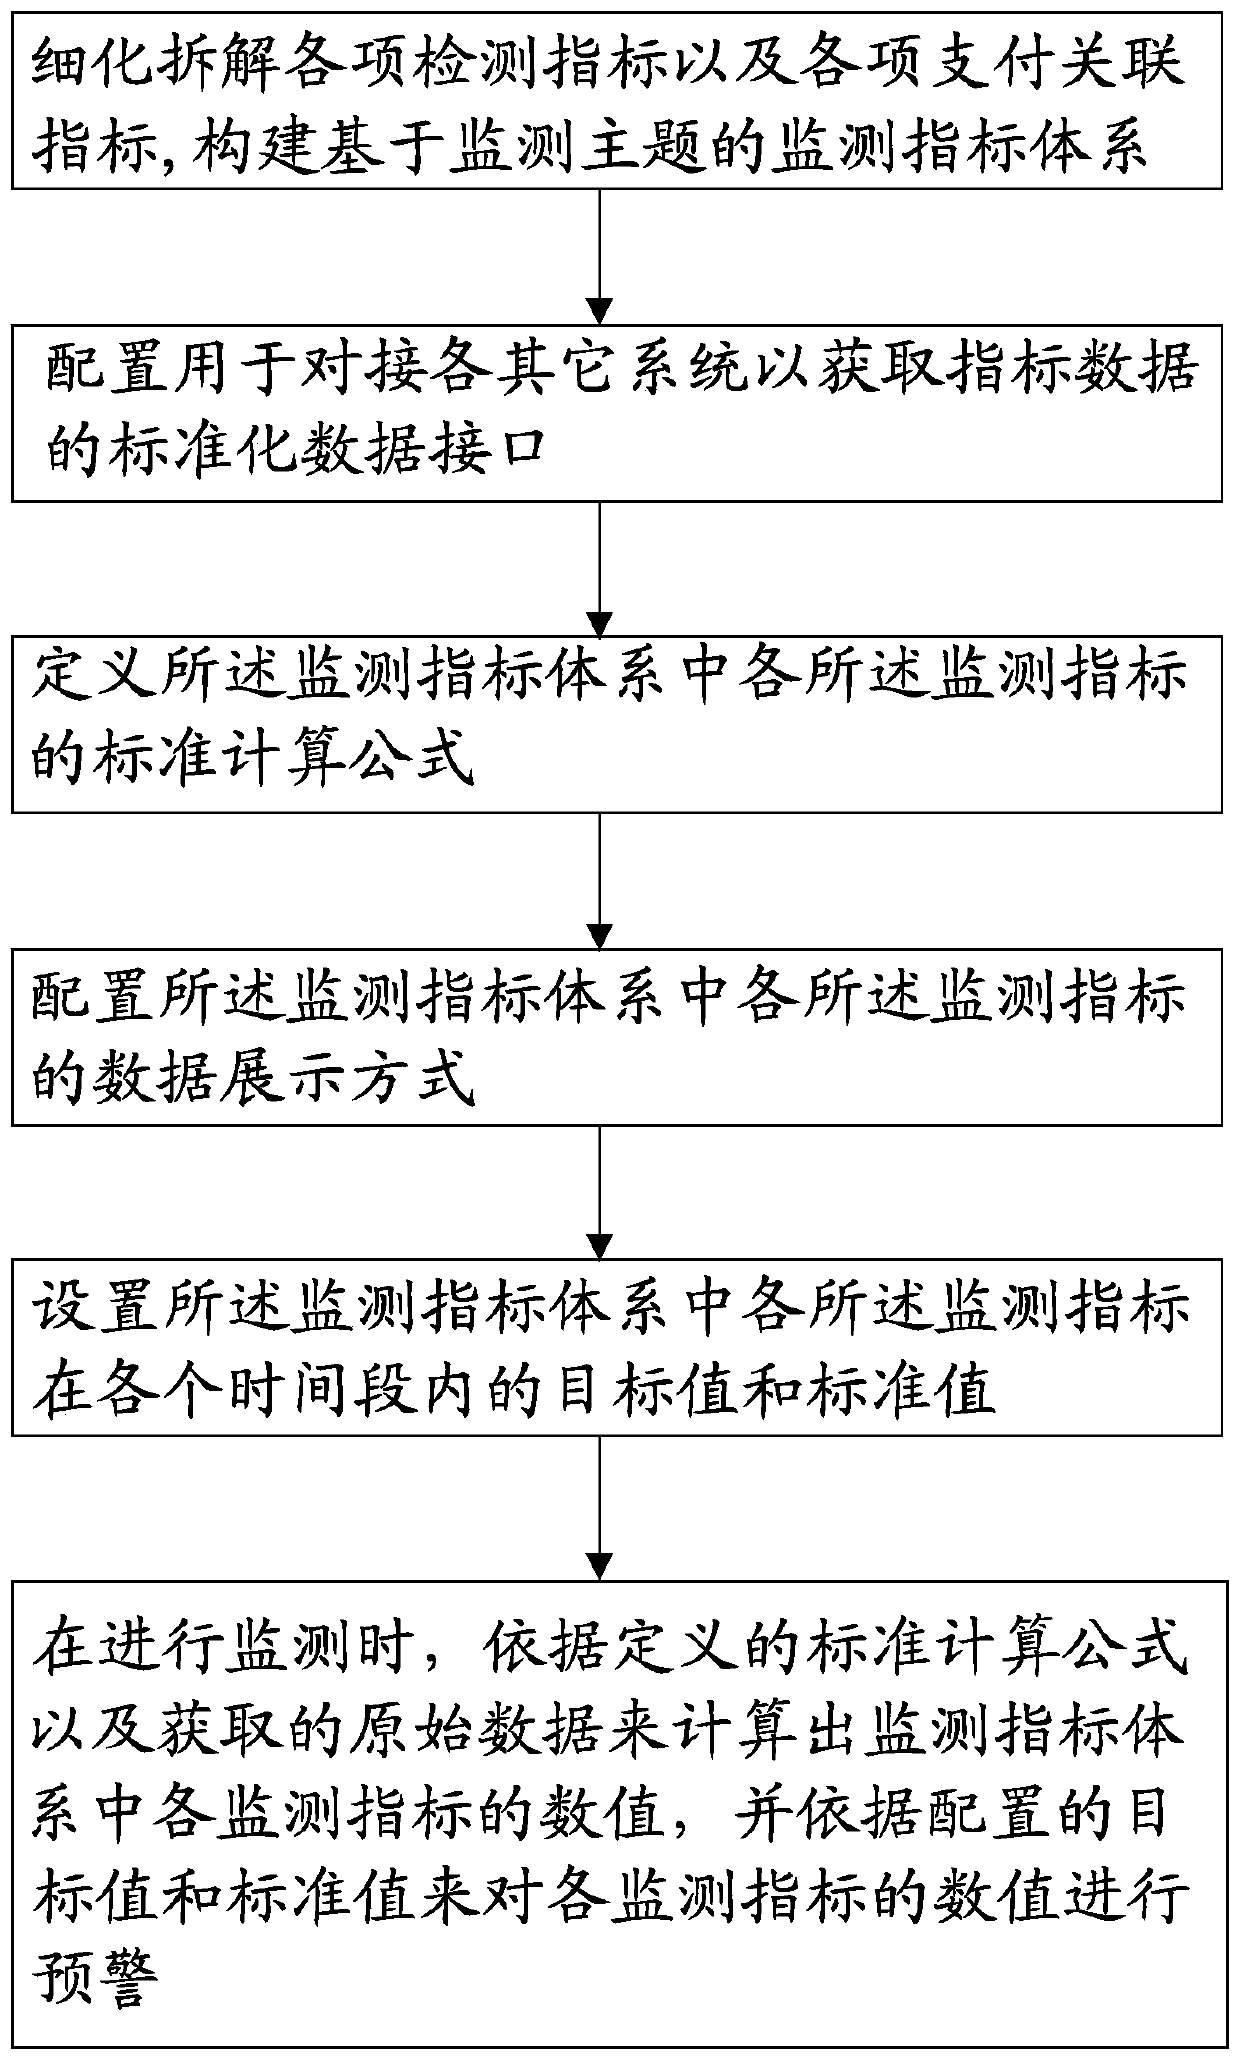 Result-oriented medical improvement promotion loan project dynamic monitoring method and system